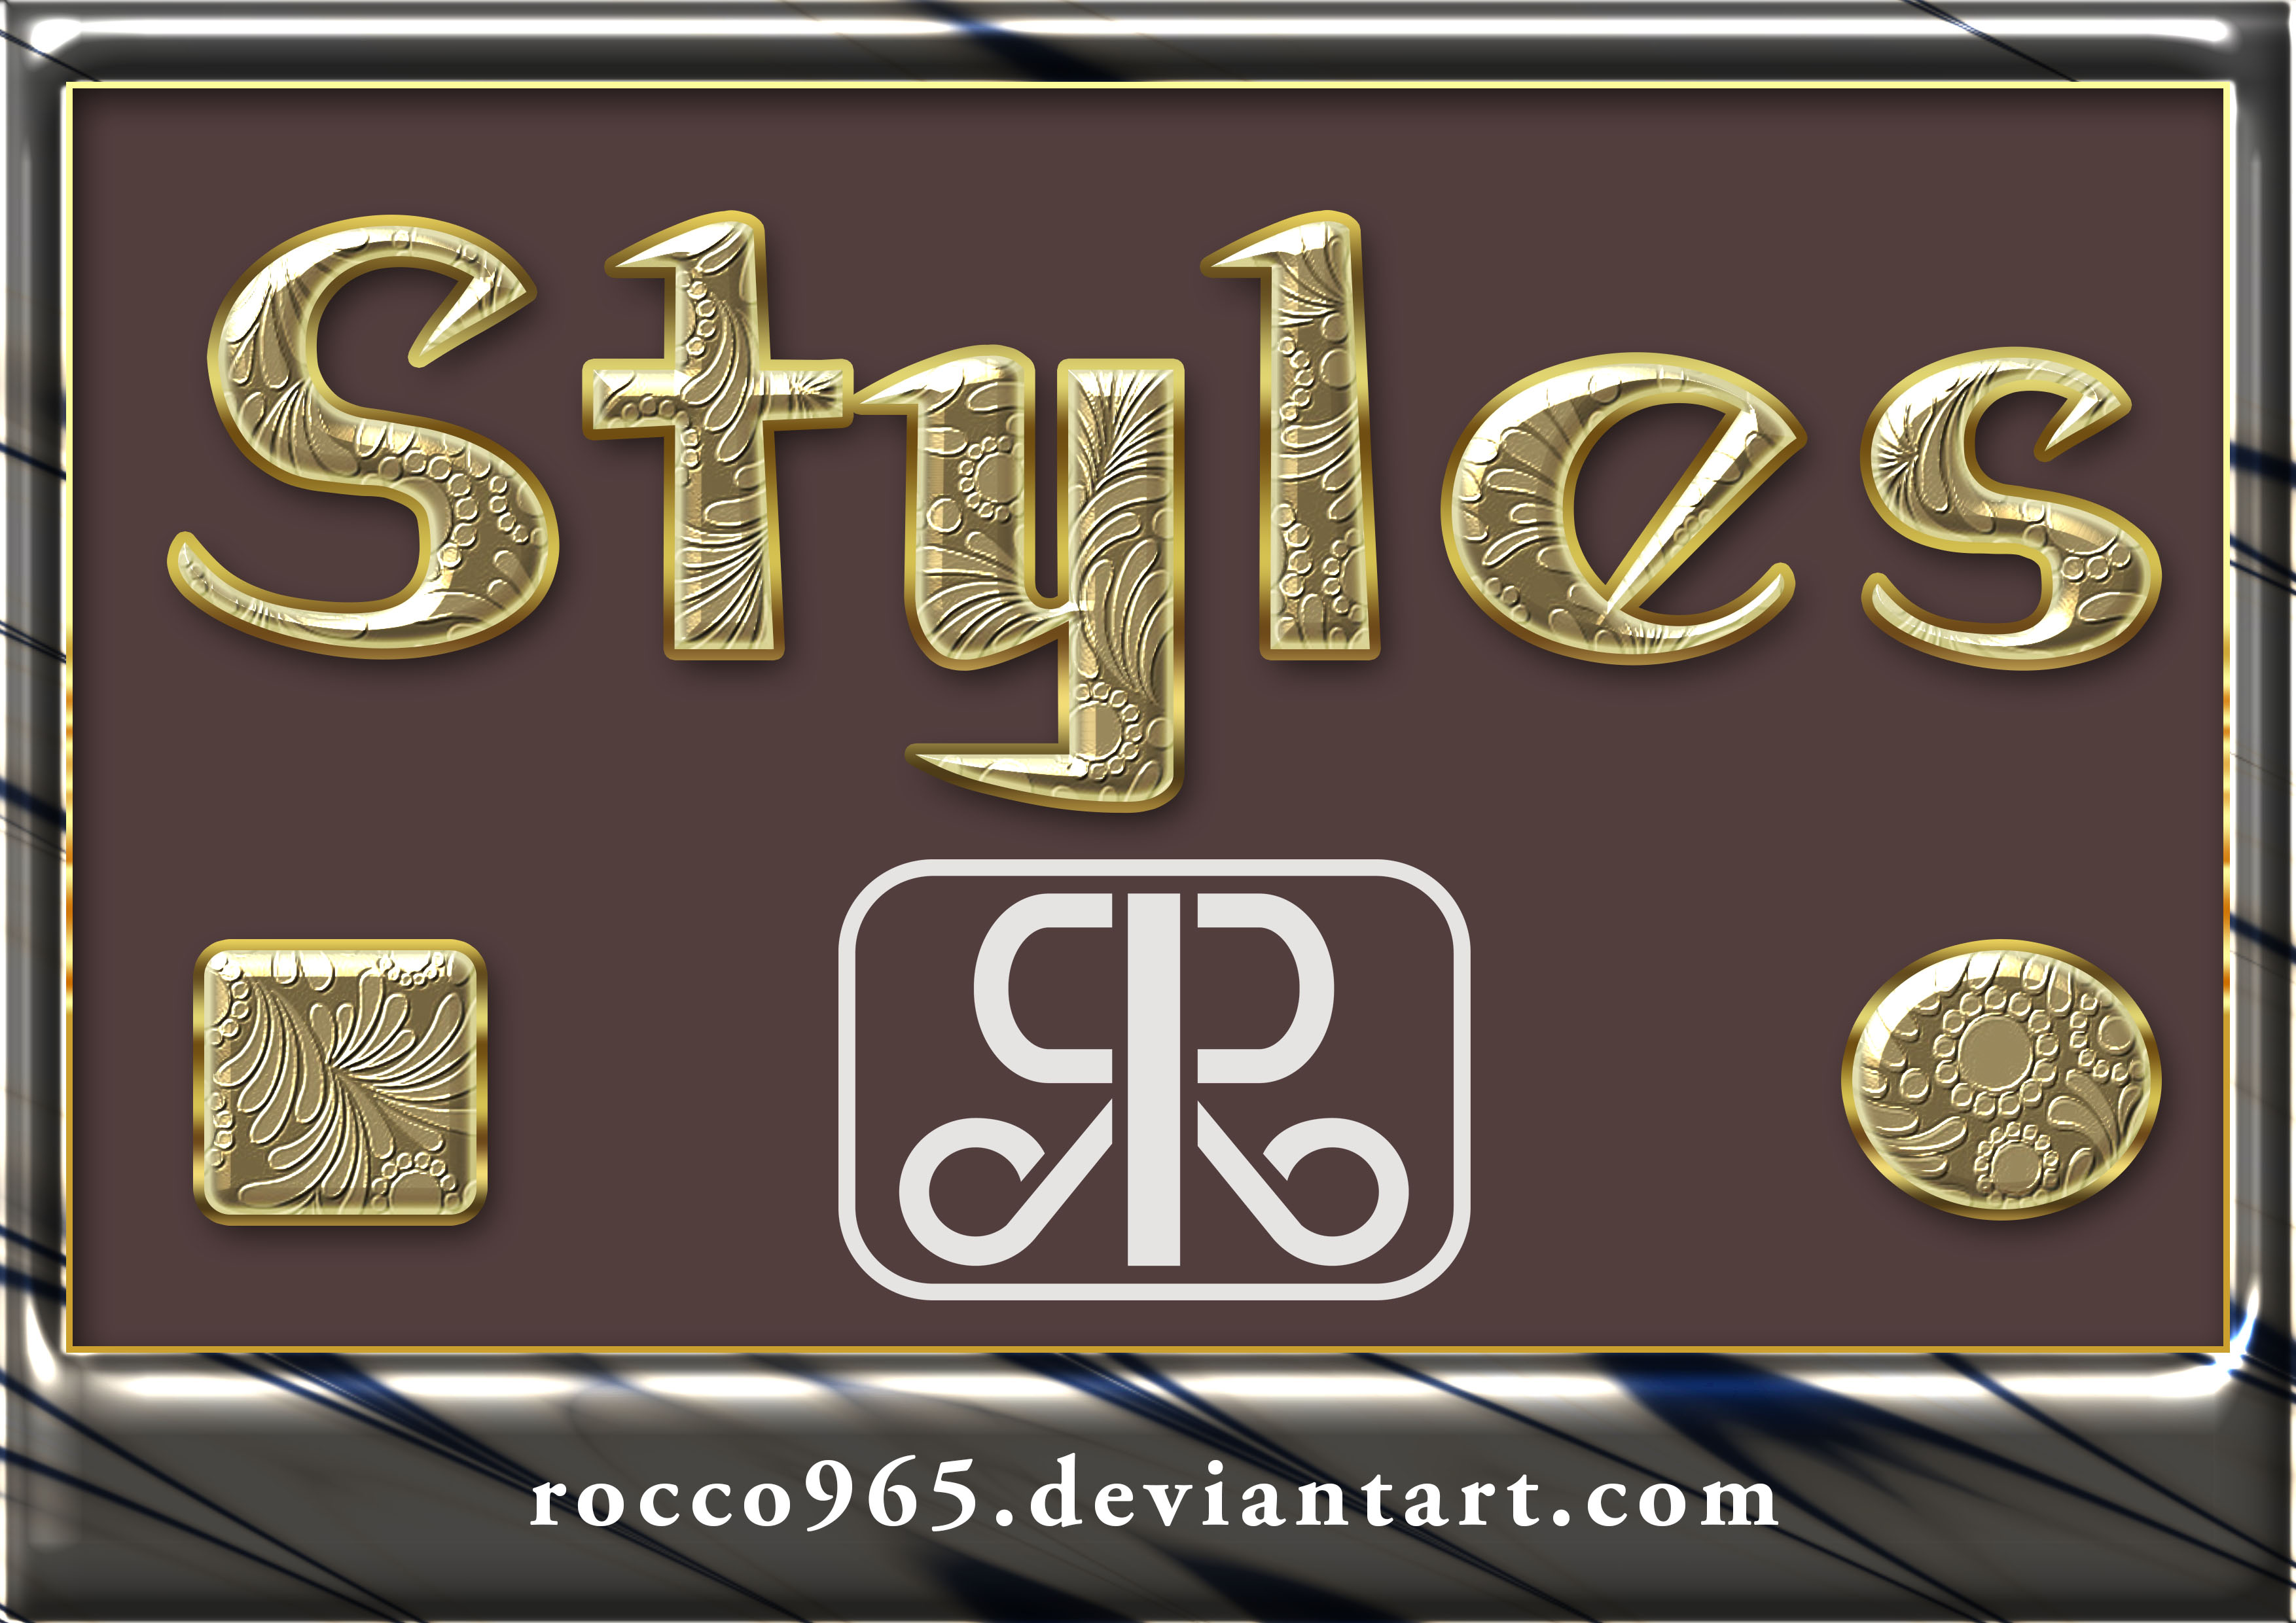 Styles 256 by Rocco 965